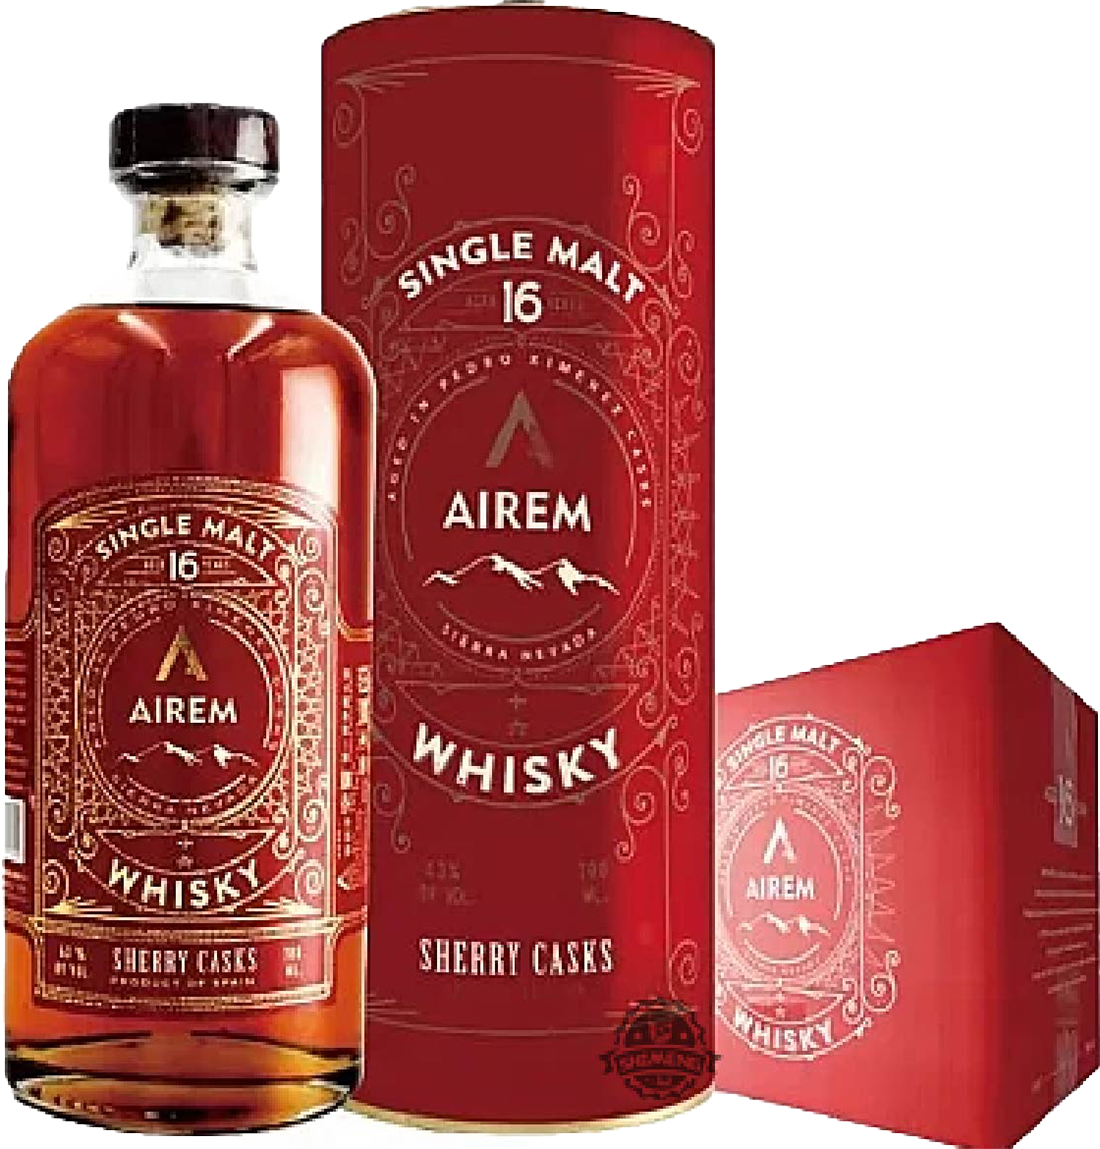 Airem 16 Years Old Single Malt Whisky